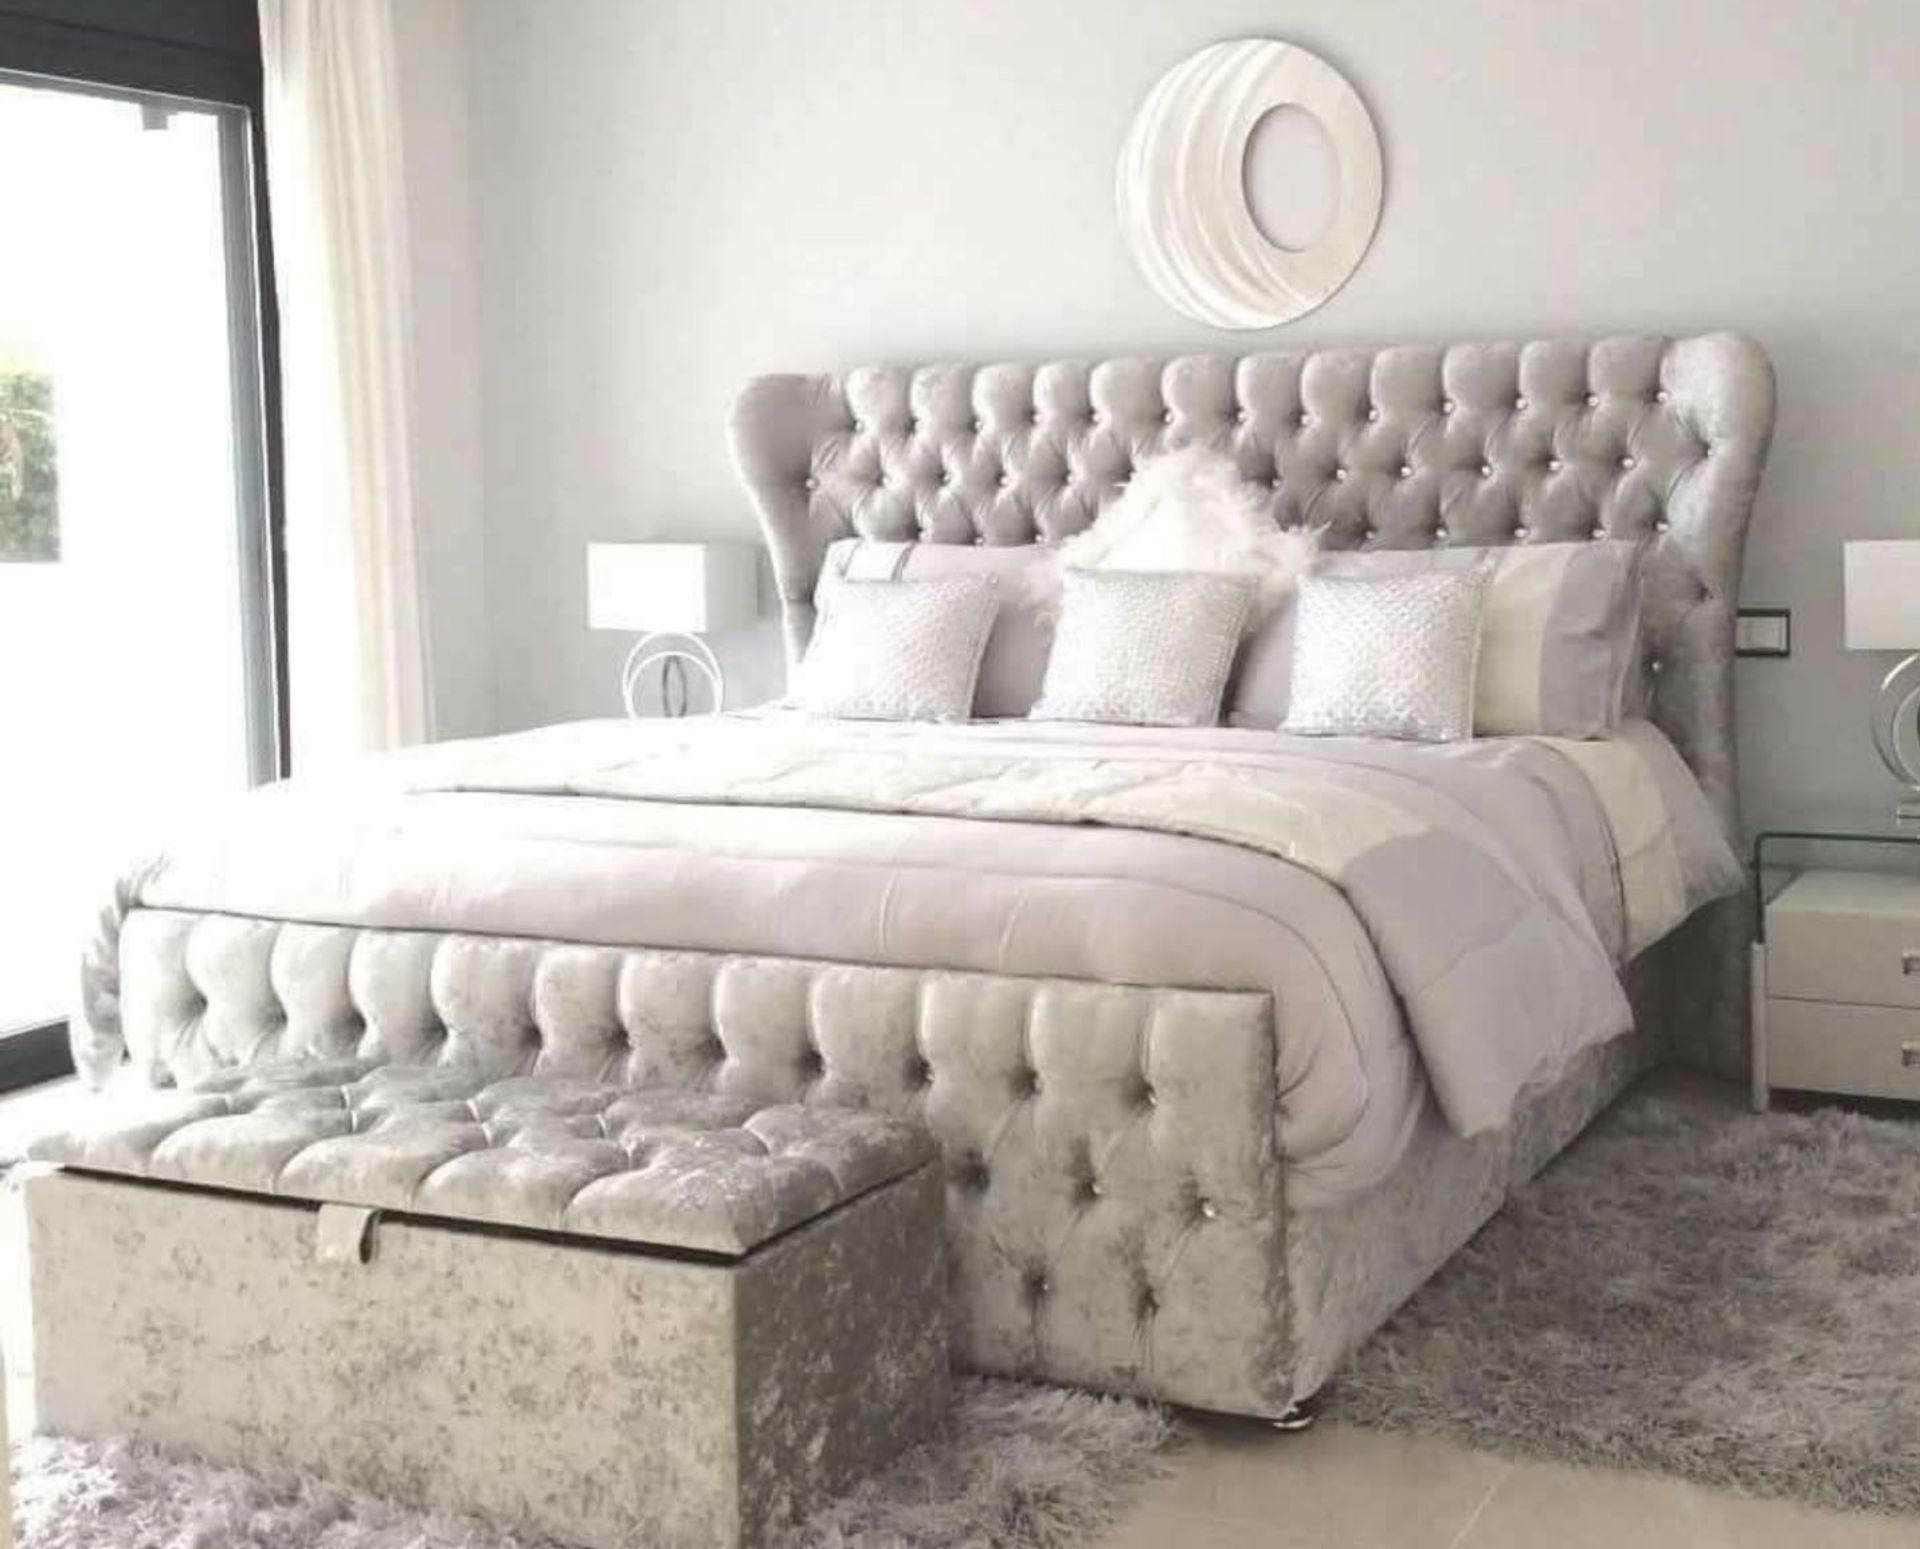 Majestic King Size Sleigh Bed Silver This a stunning addition to the bedroom, this eloquent wingback